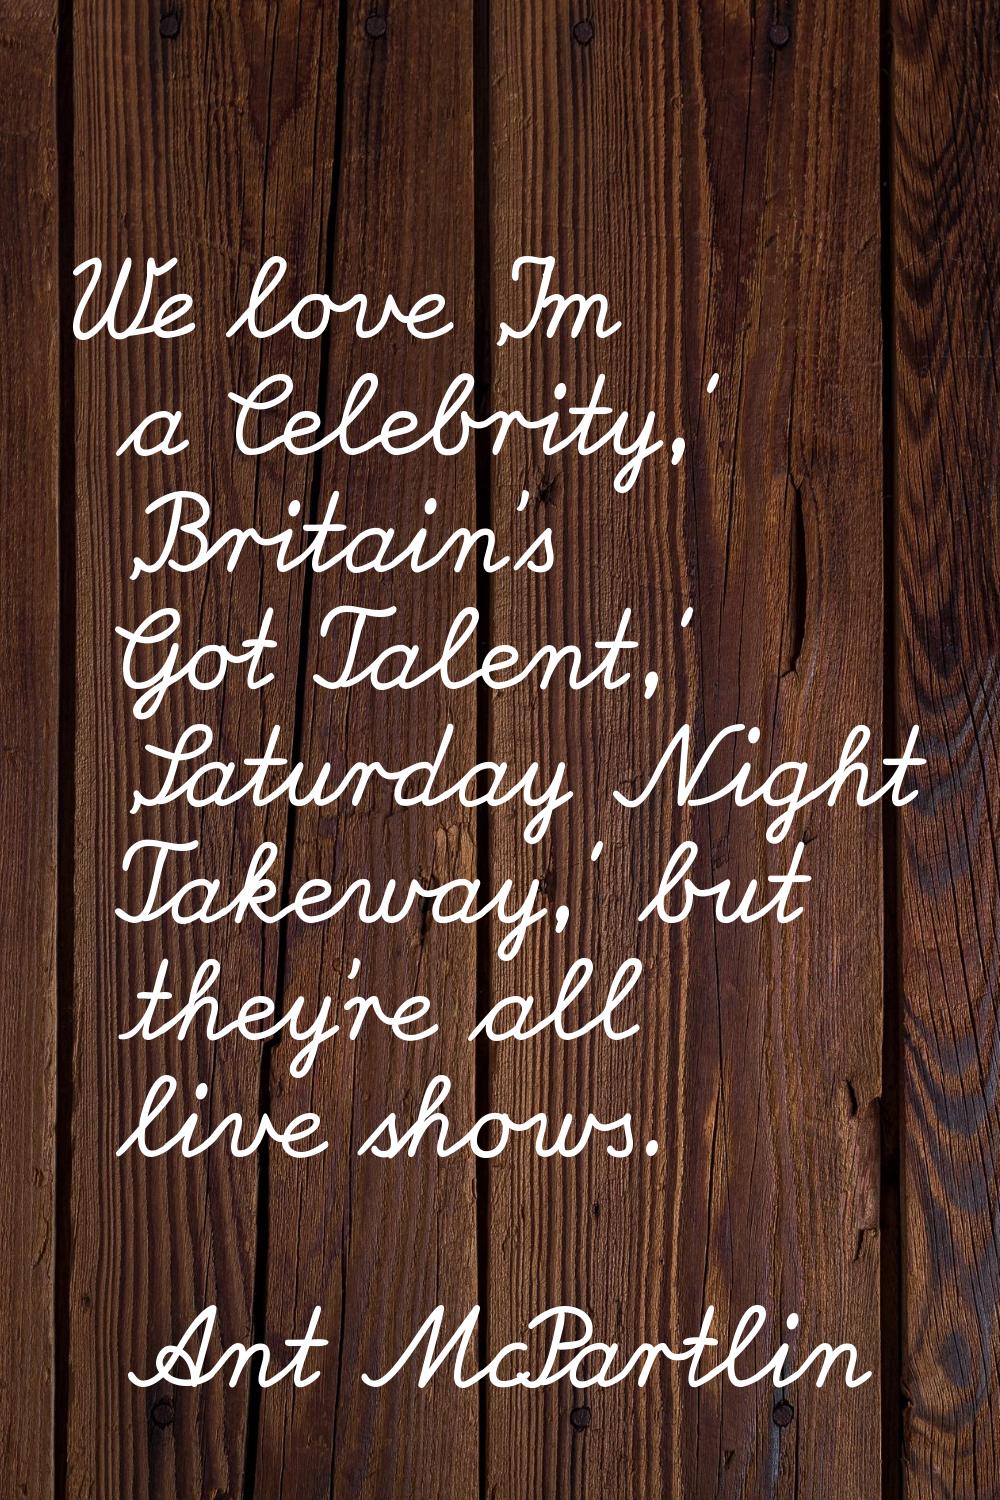 We love 'I'm a Celebrity,' 'Britain's Got Talent,' 'Saturday Night Takeway,' but they're all live s